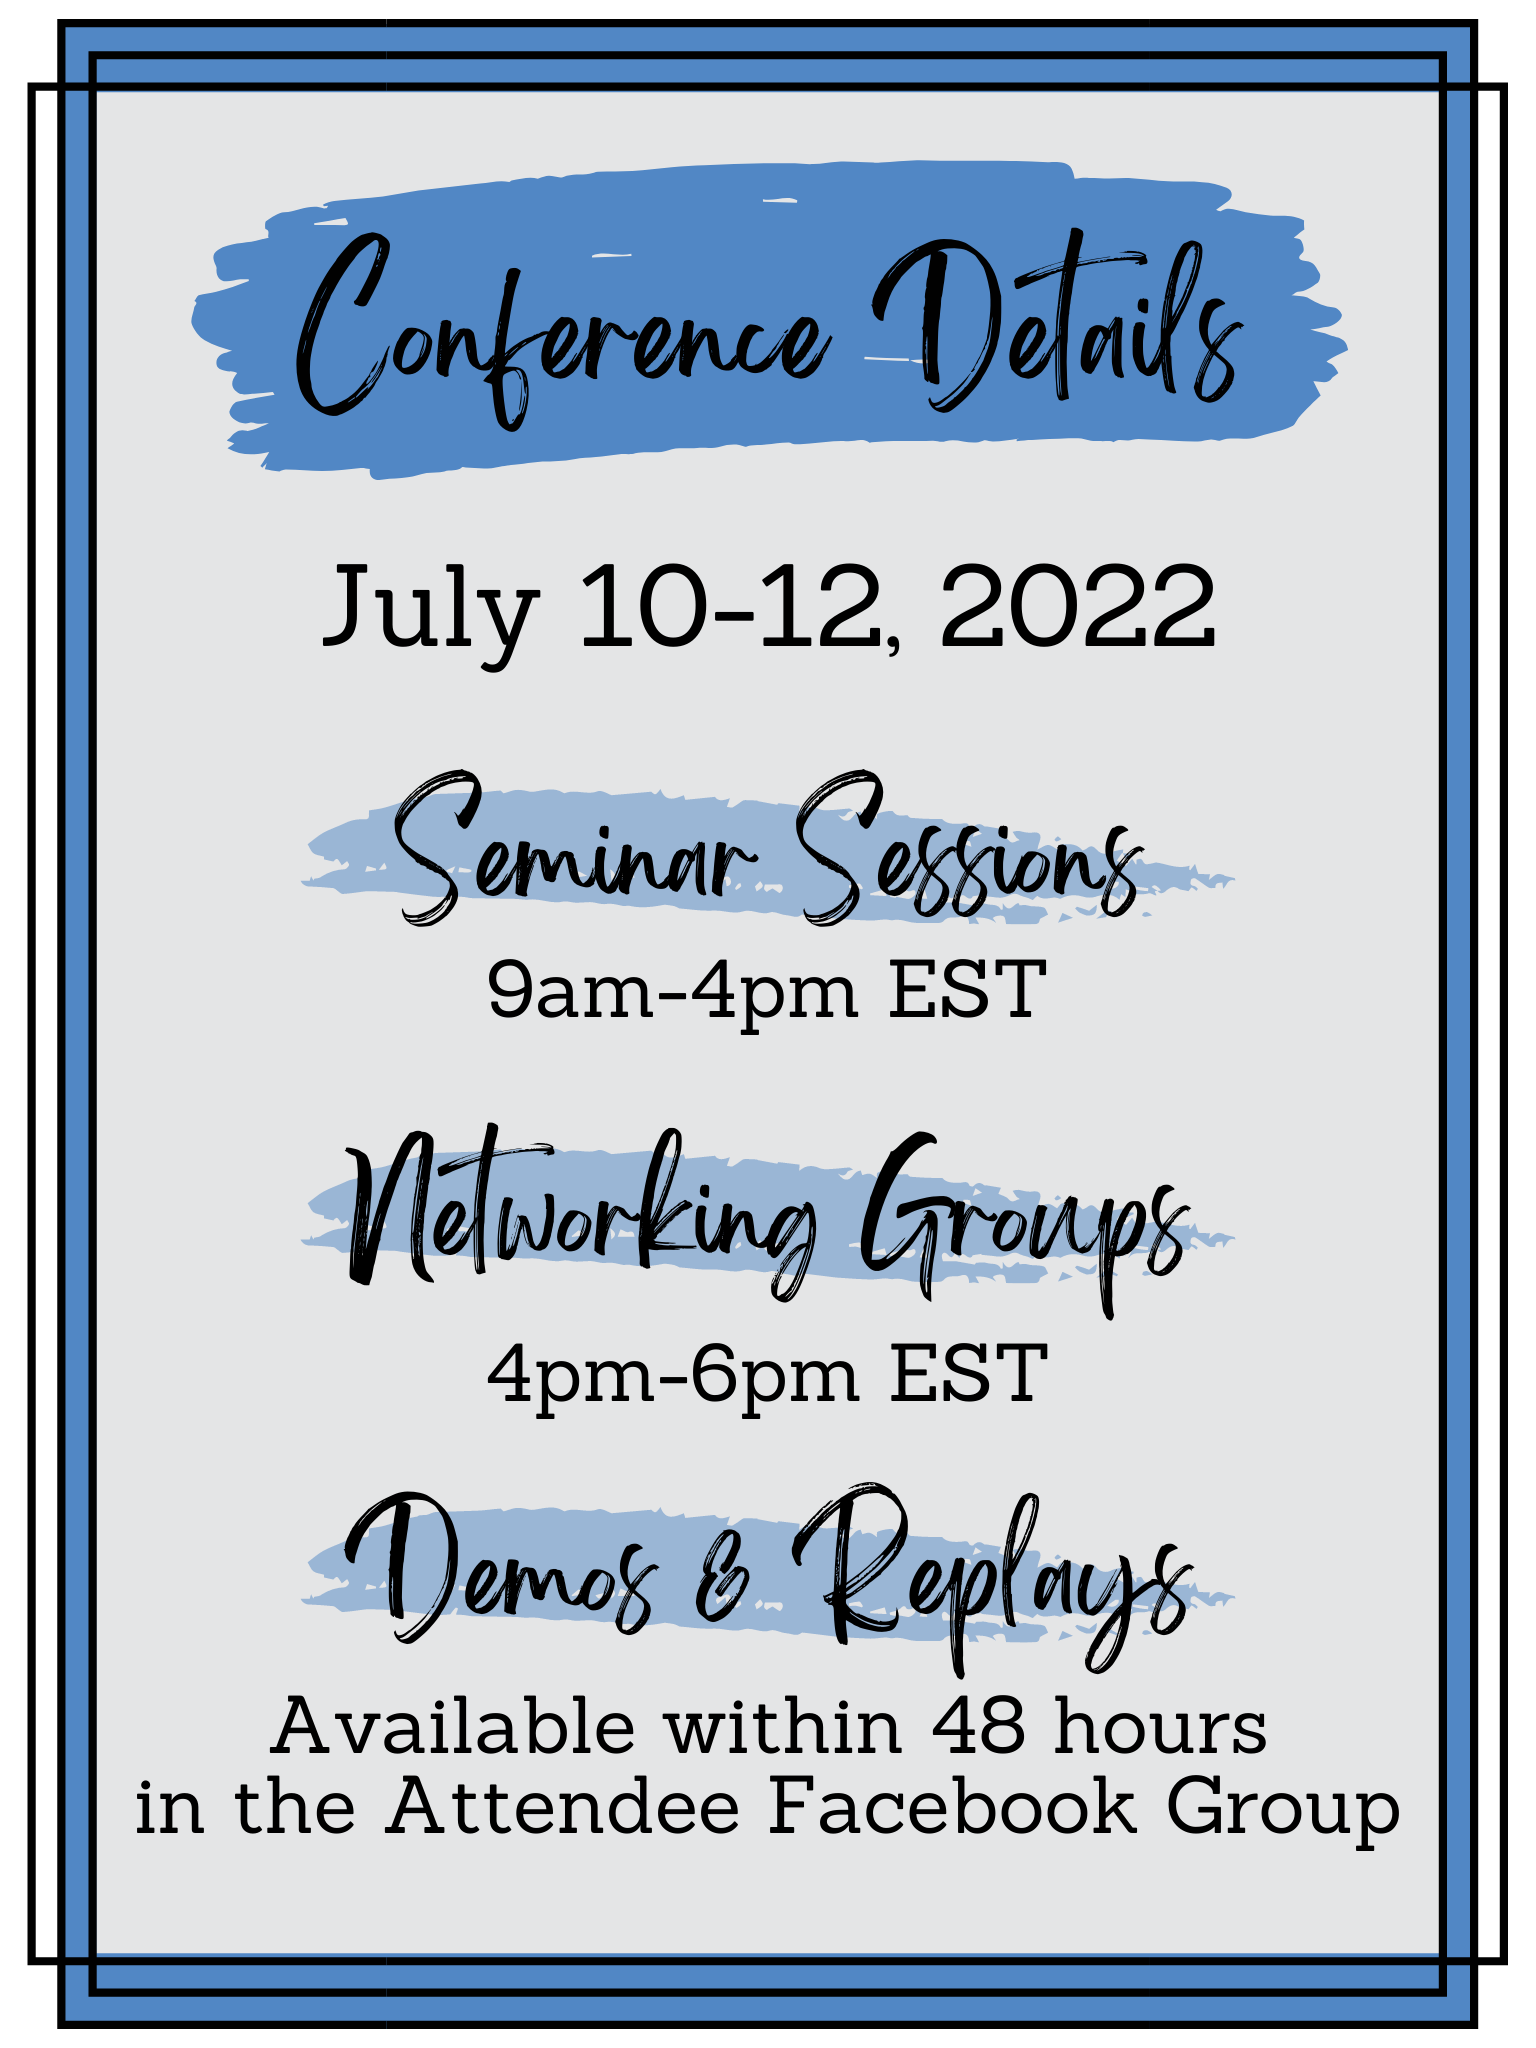 Conference Details: July 10-12, 2022; Seminar Session 9am-4pm EST, Networking Groups: 4pm-6pm EST; Demos & Replays: Available within 48 hours in the Attendee Facebook group